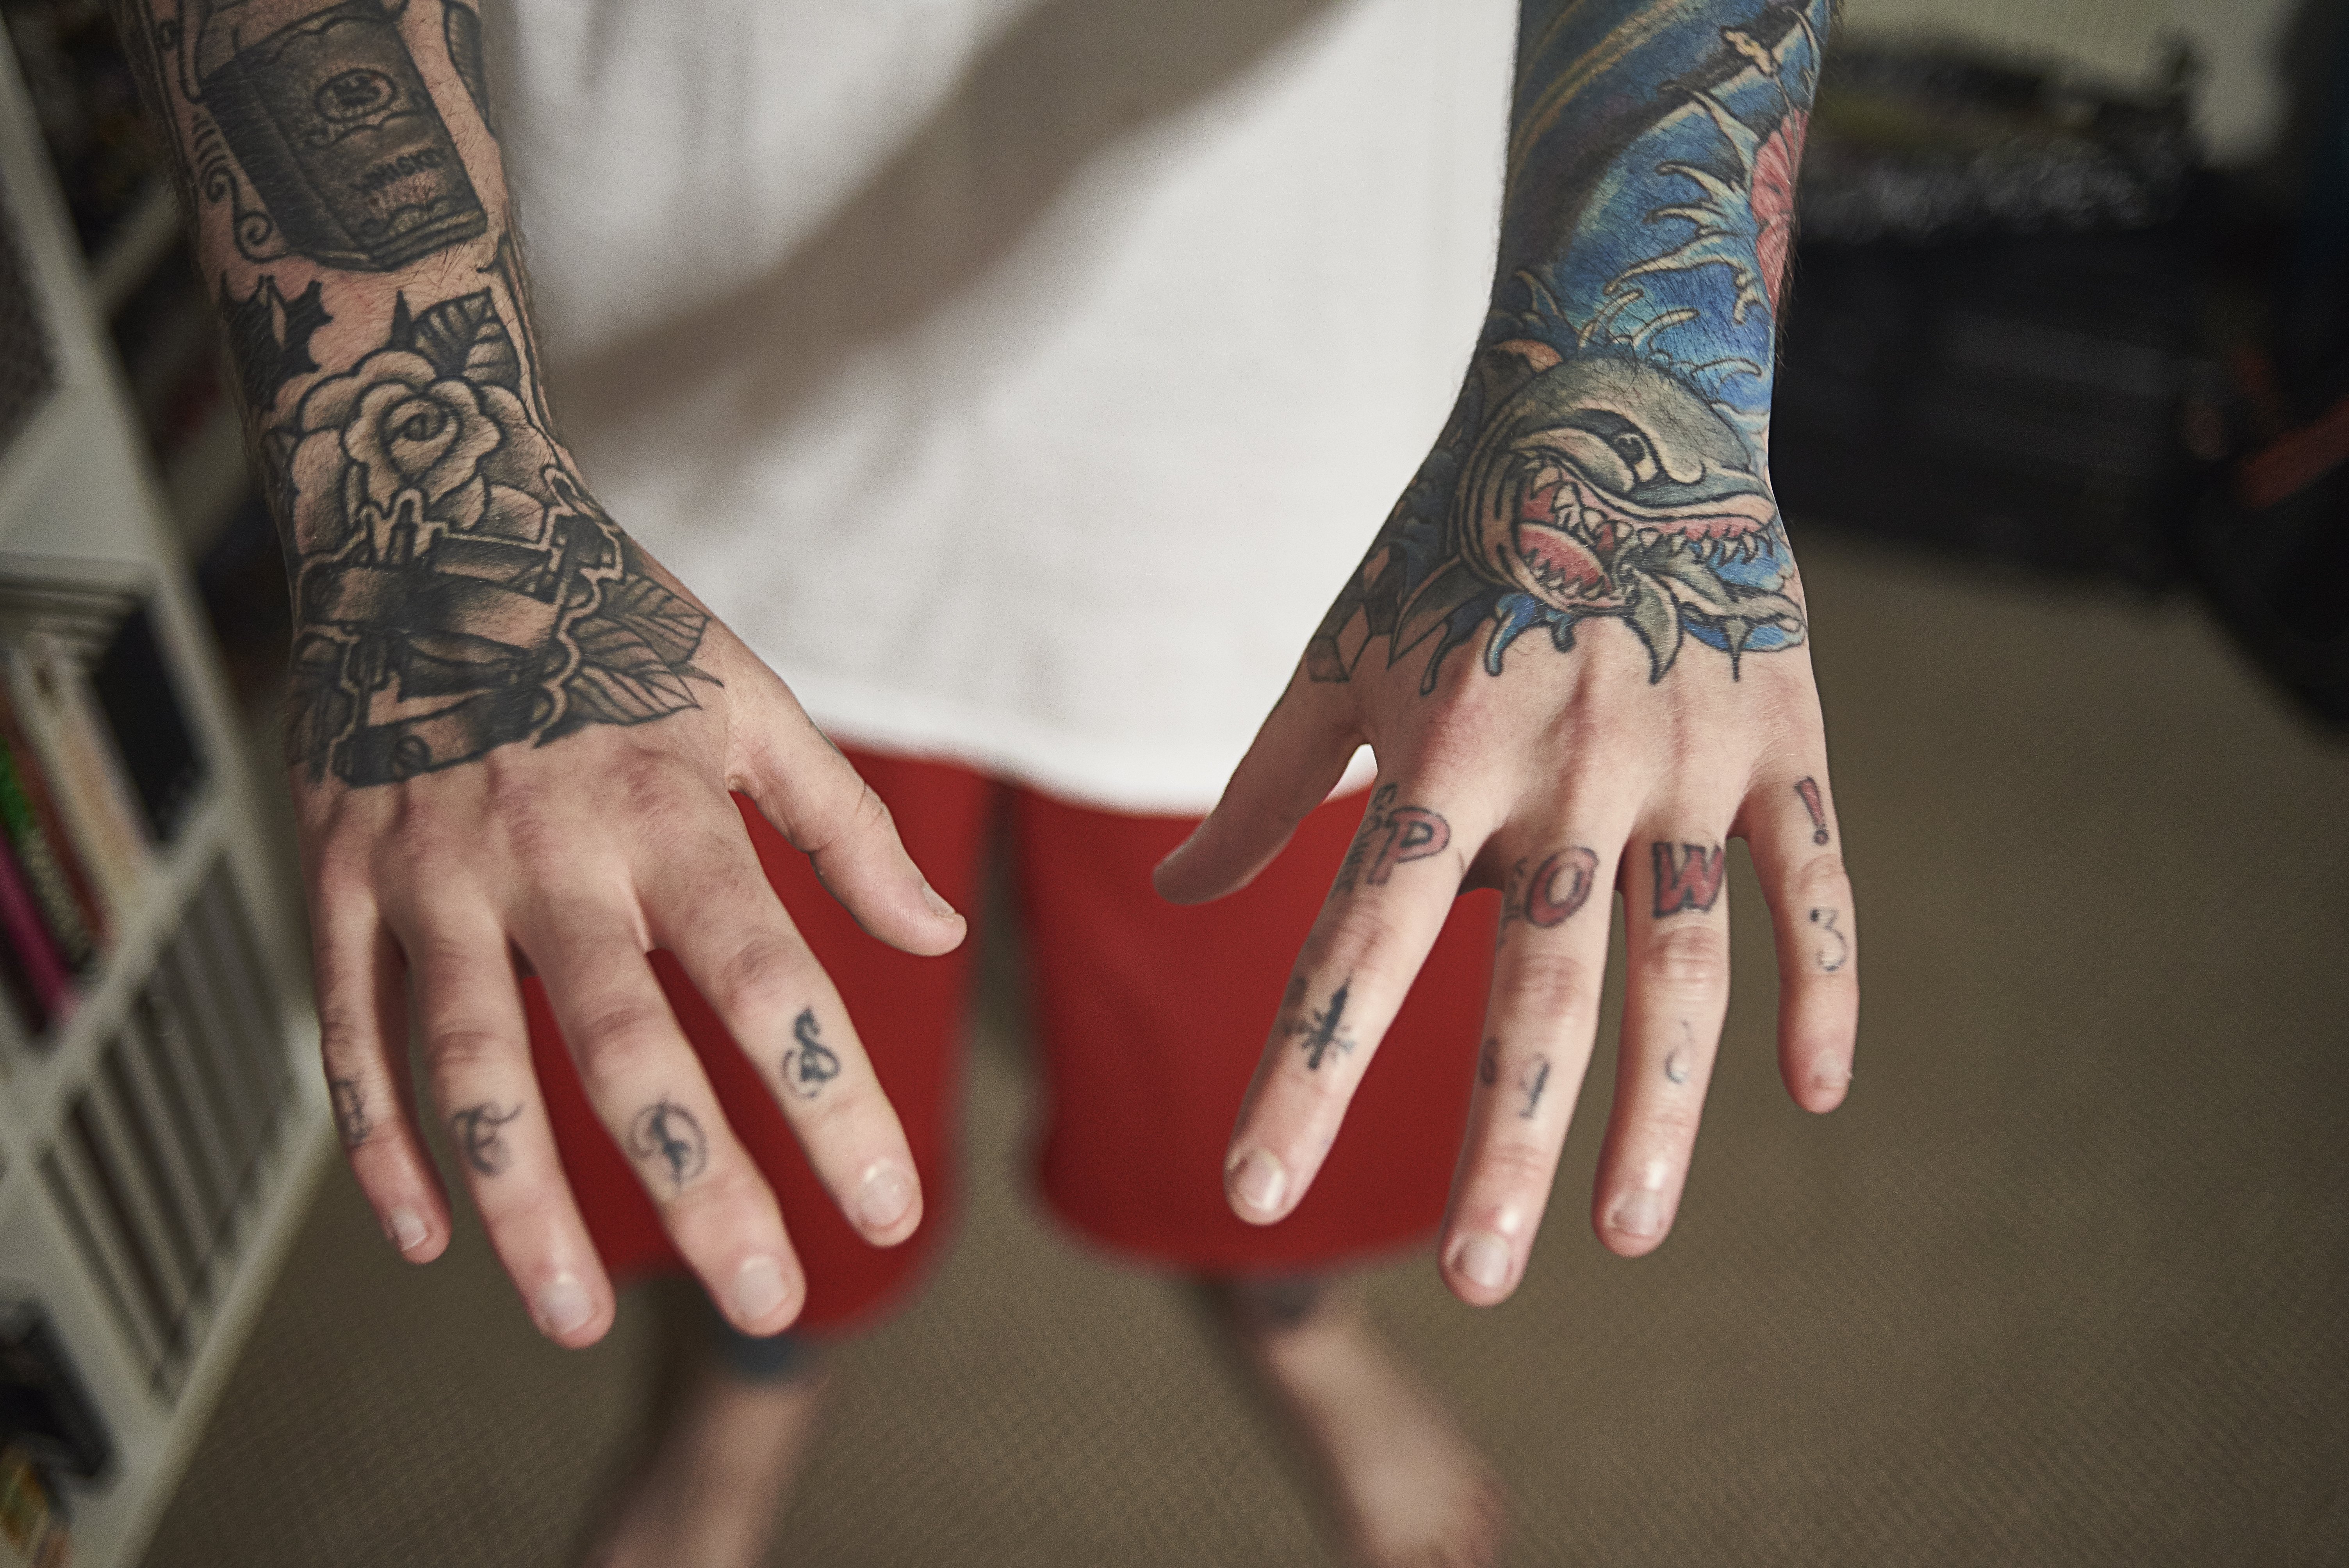 A close up image of a tattoo enthusiast holding out his hands to show the art work he has on his hands. | Source: Getty Images